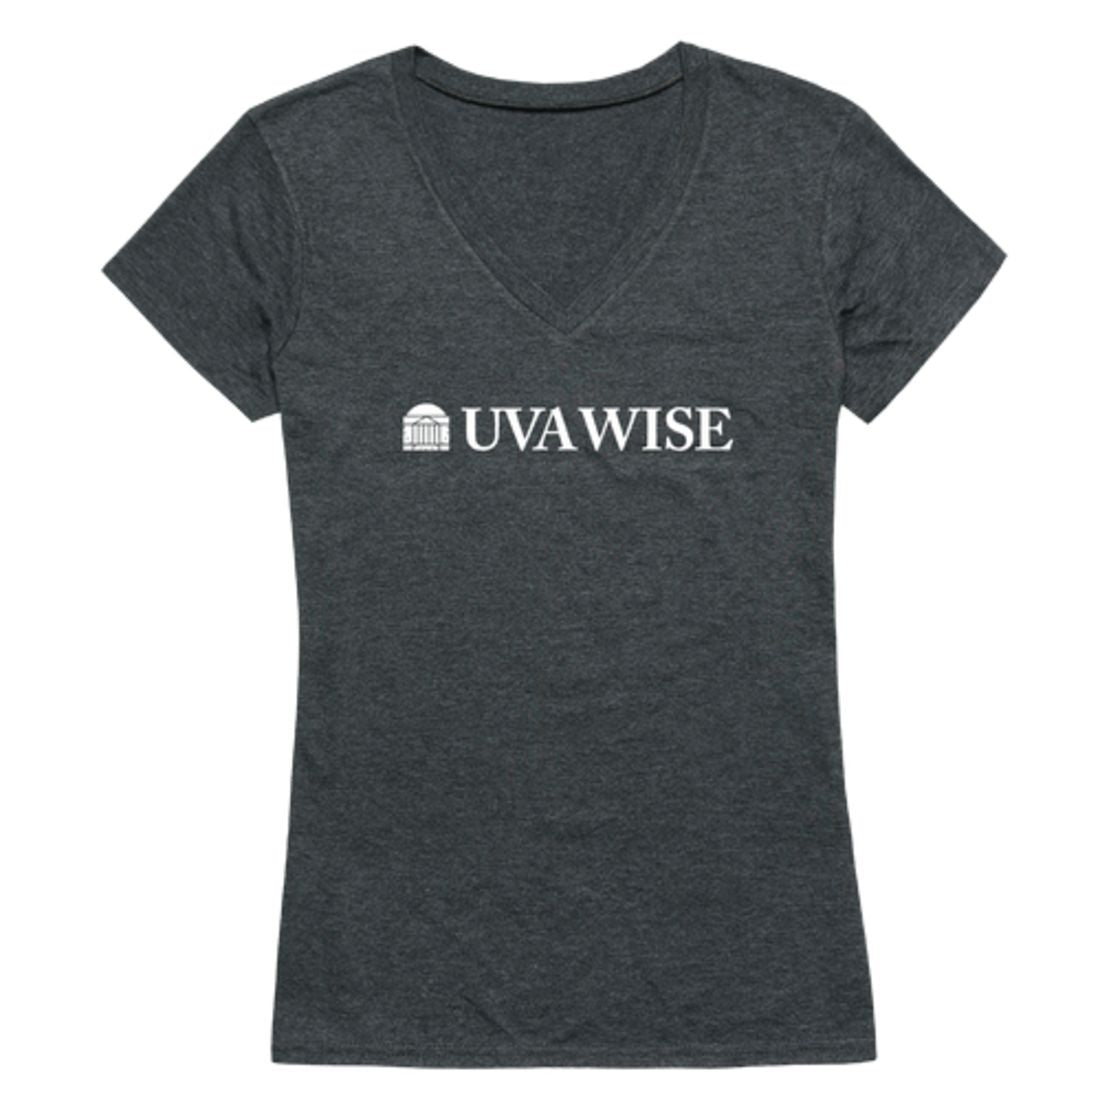 University of Virginia's College at Wise Cavaliers Womens Institutional T-Shirt Tee